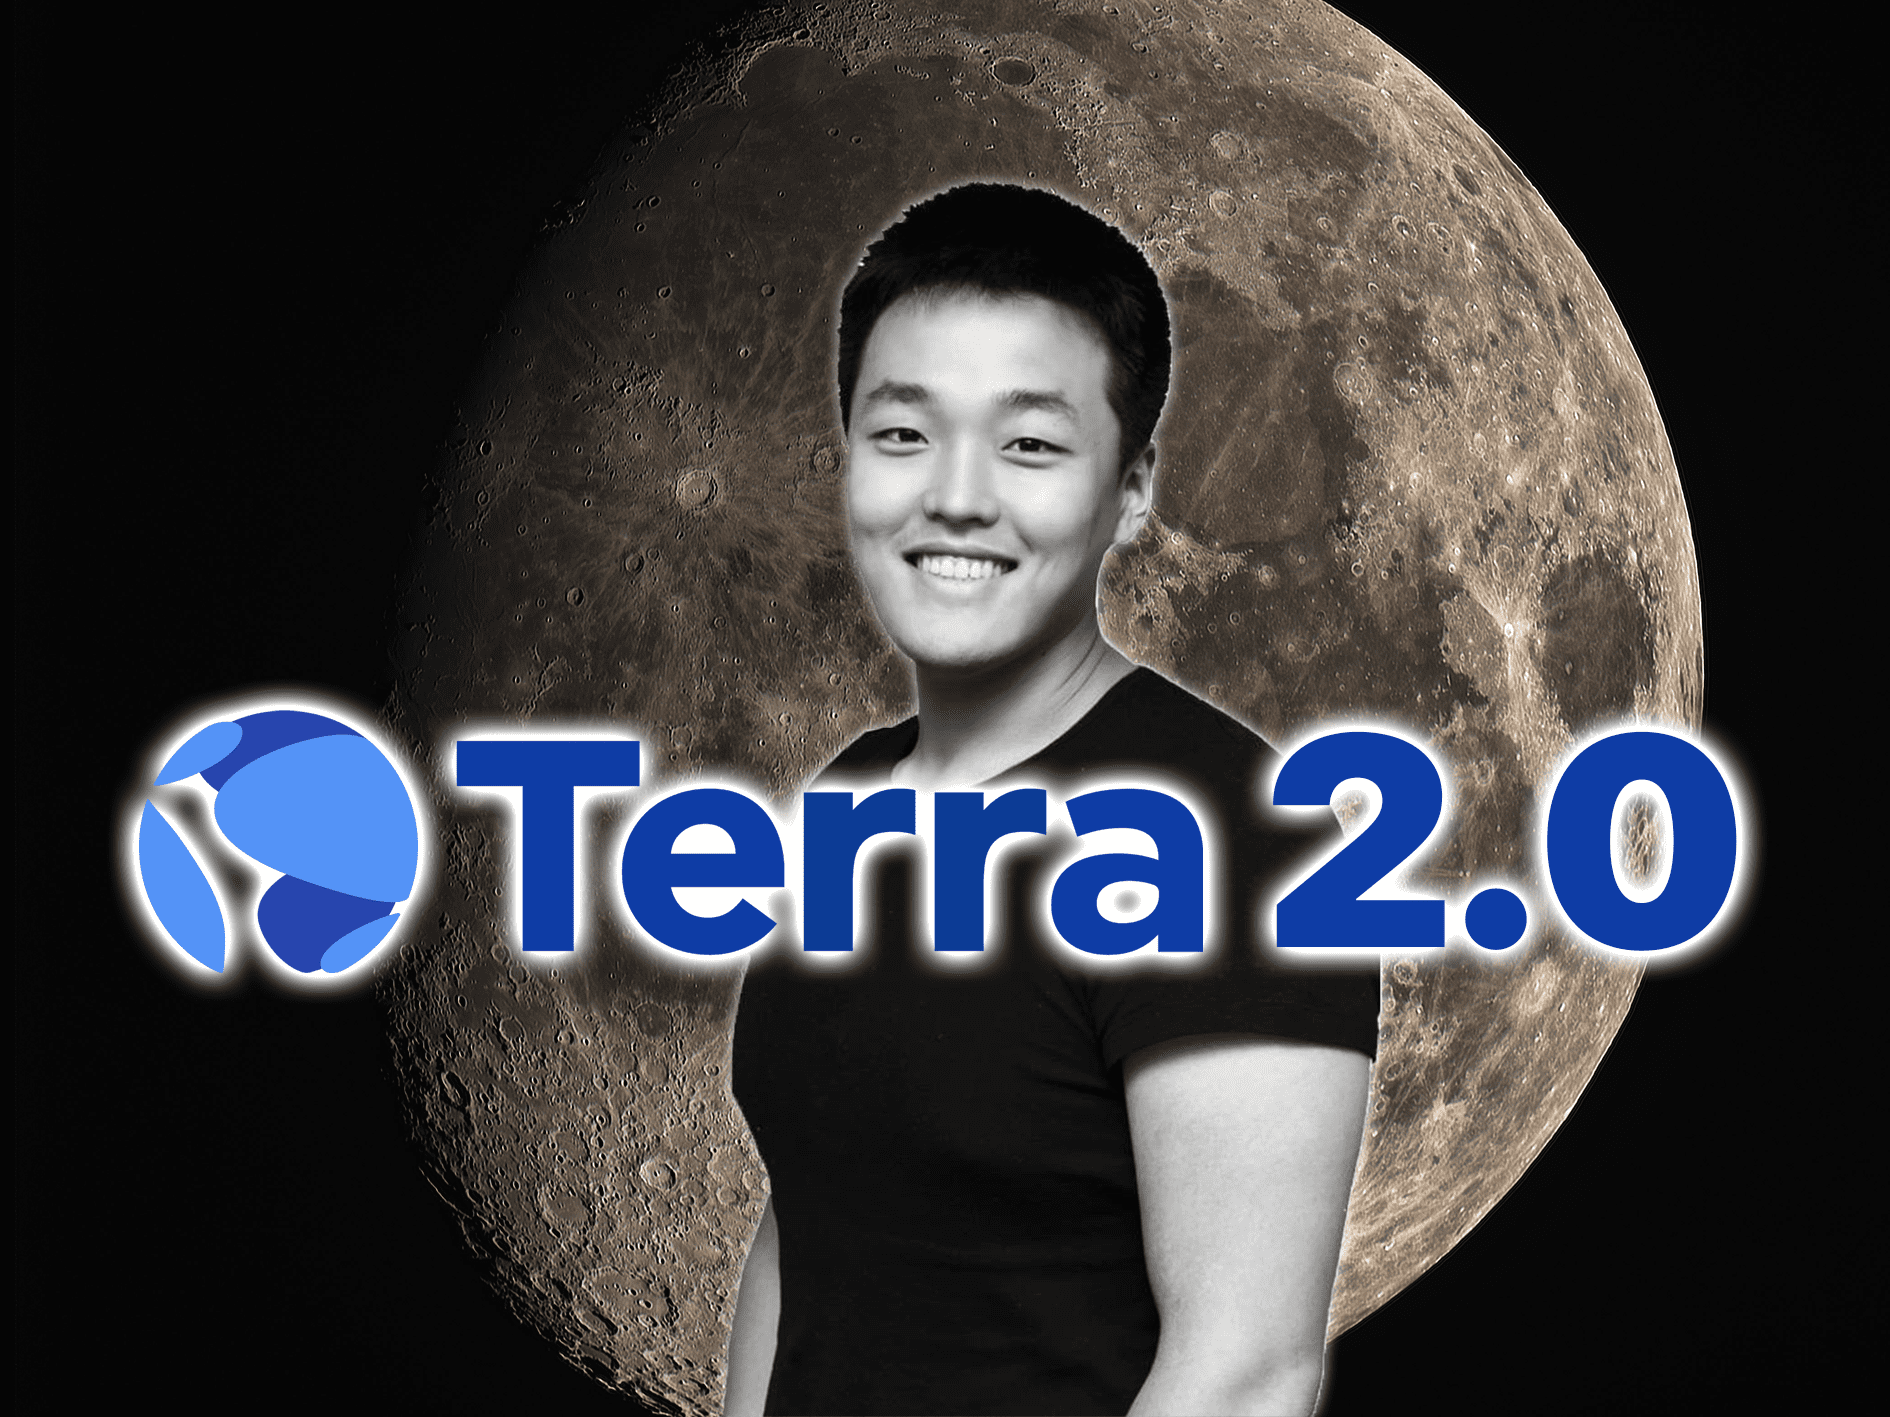 Successful again belief of Terra group a tall order for Do Kwon: Consultants